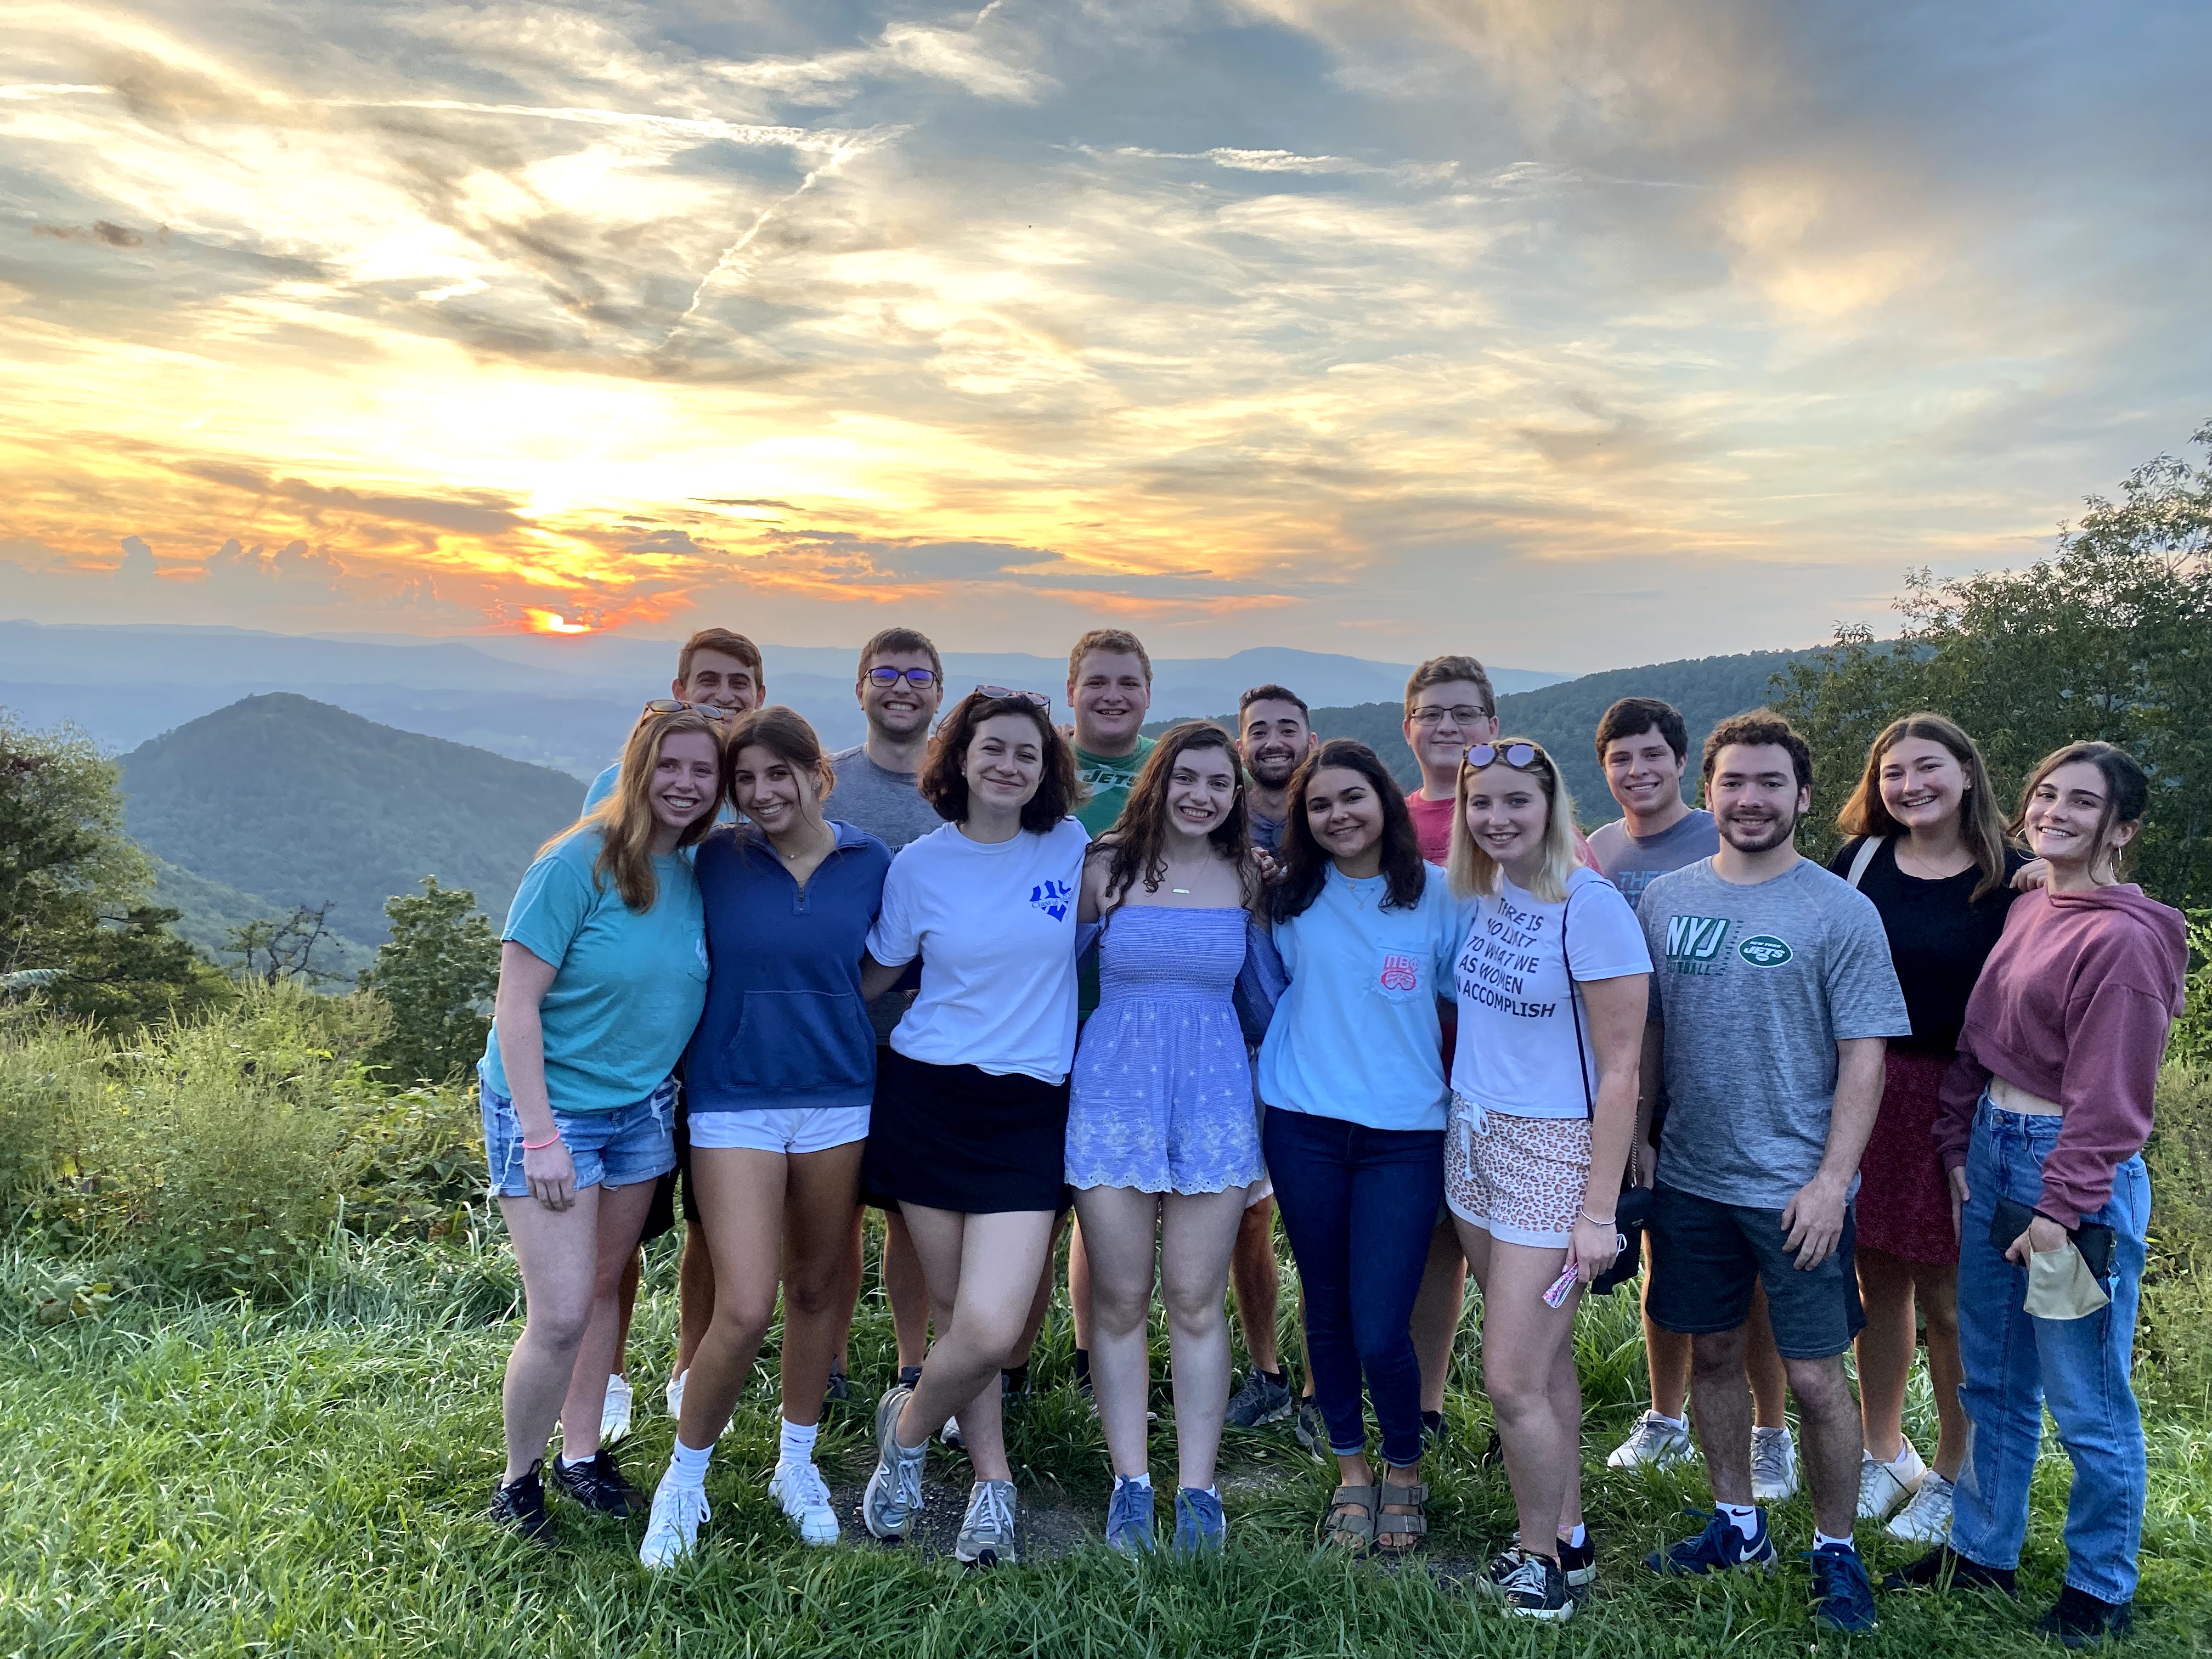 First Year Students of Hillel (FYSH) big and littles enjoying the sunset on the Blue Ridge Parkway.